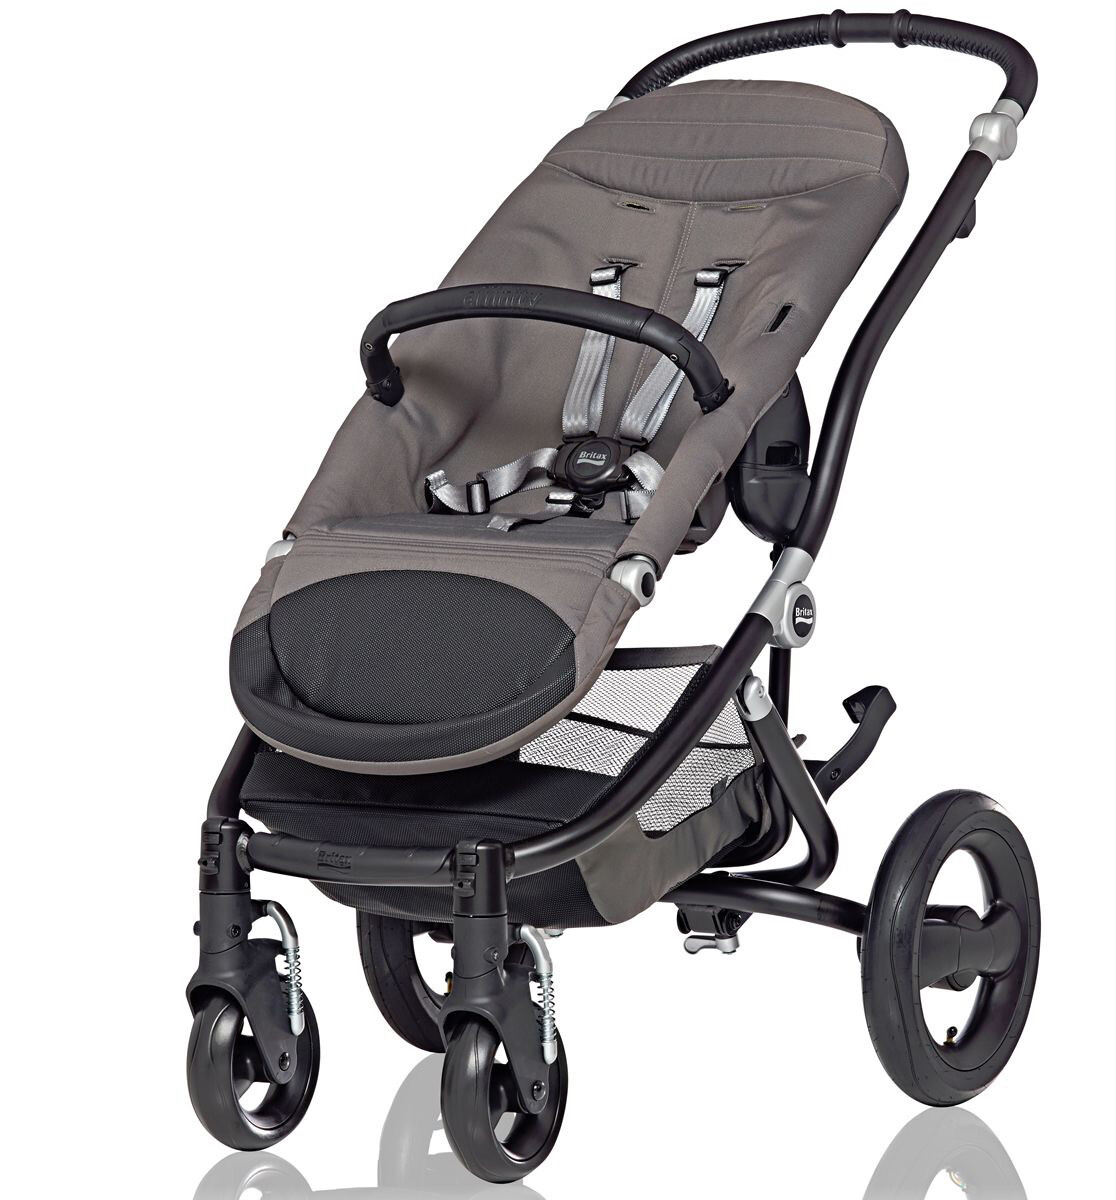 Britax Affinity Convertible Stroller- Black, White or Silver Frame